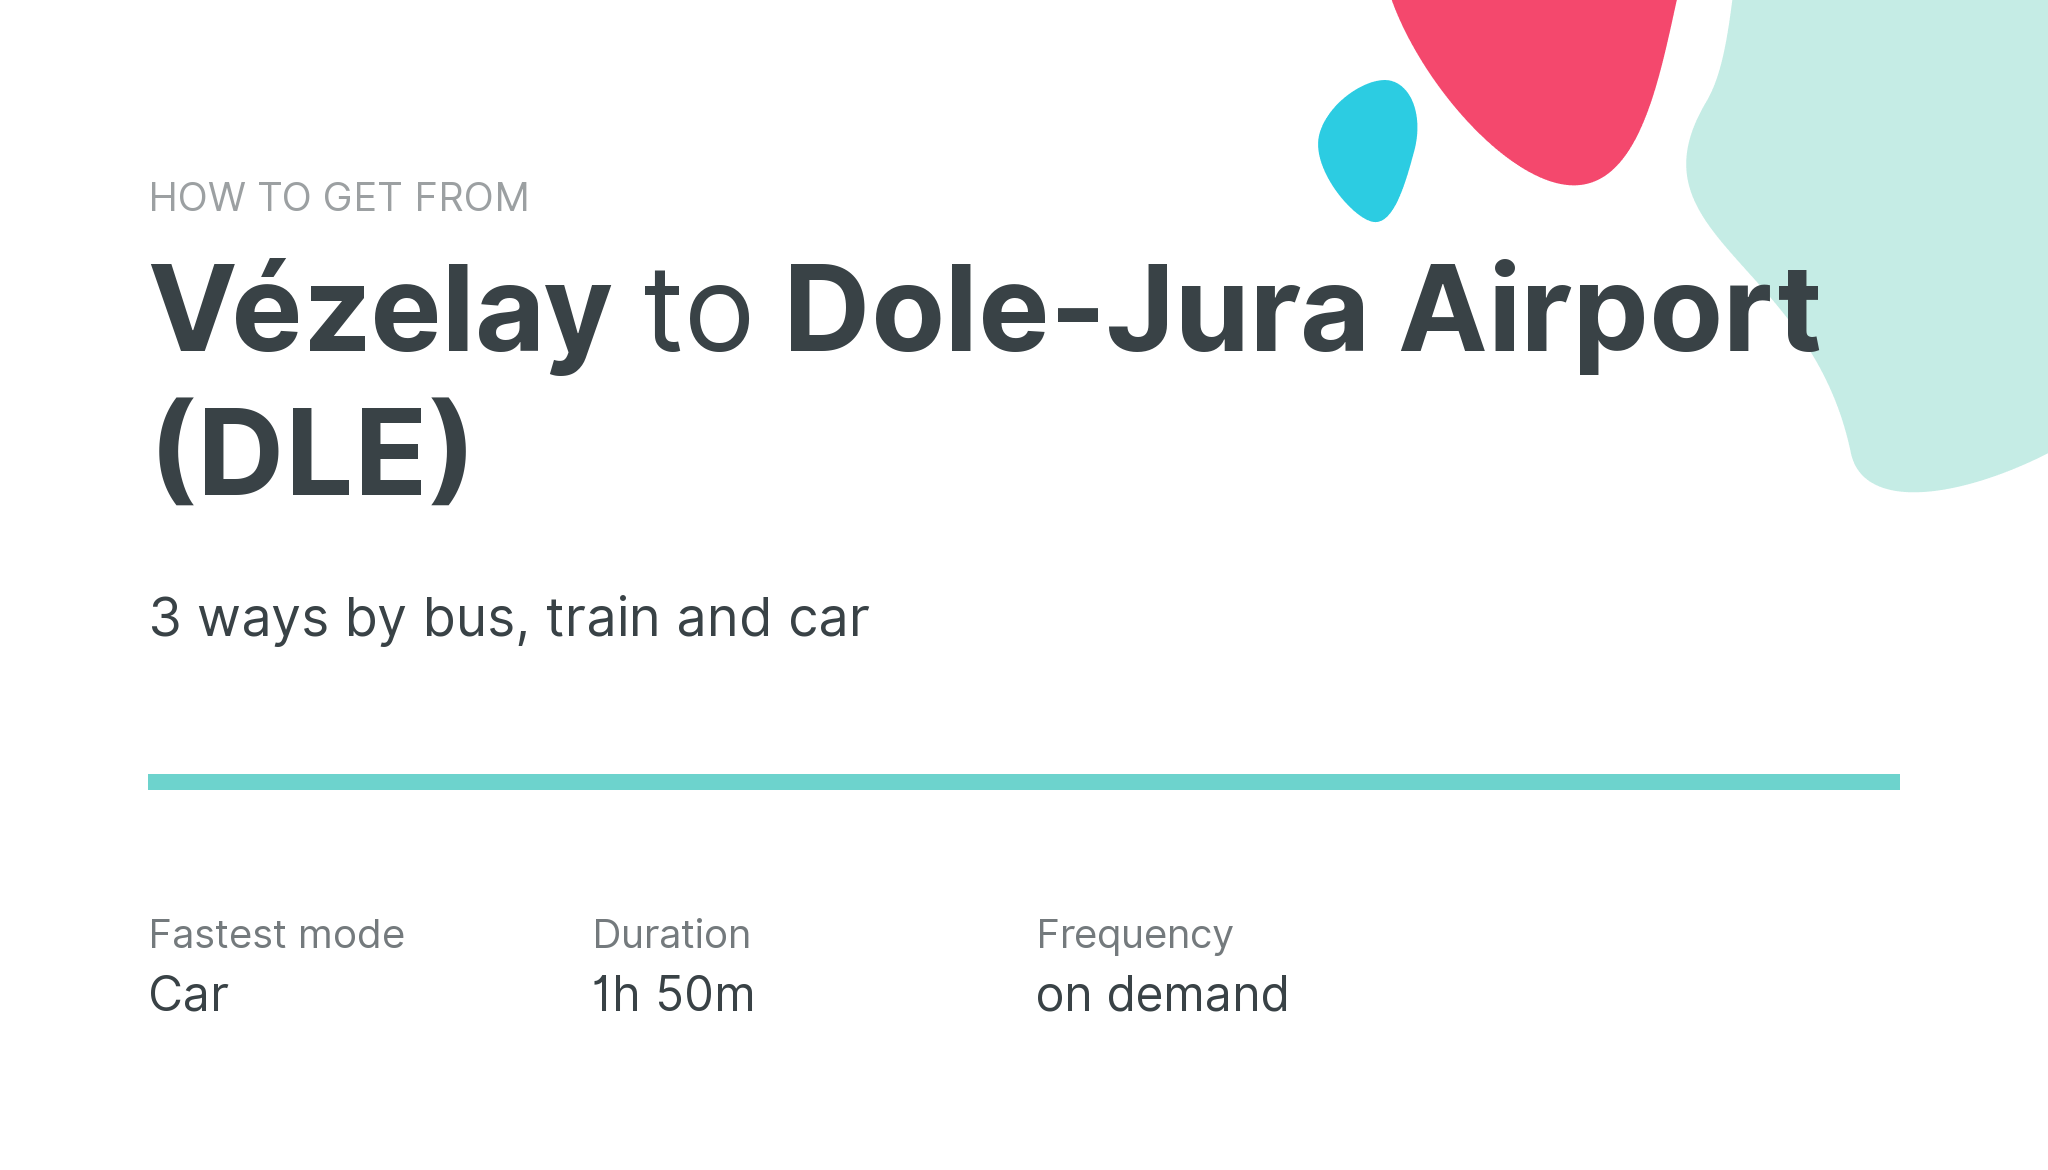 How do I get from Vézelay to Dole-Jura Airport (DLE)